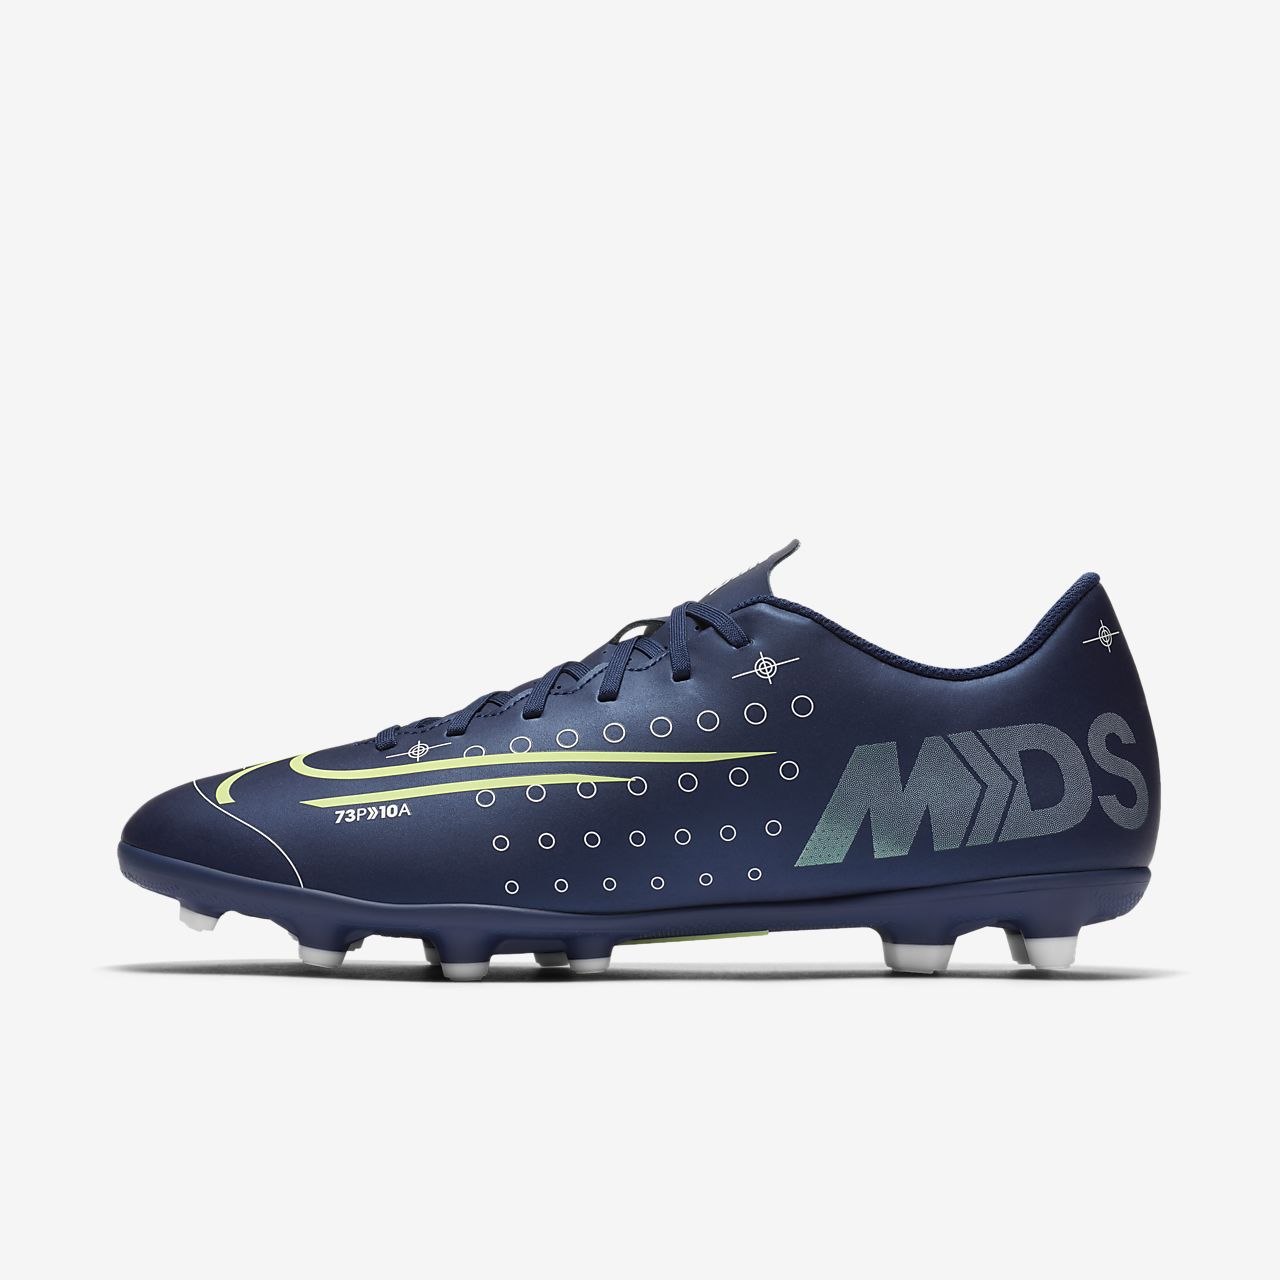 Buy Nike Mercurial Vapor 13 Academy MG Only A $ 111.